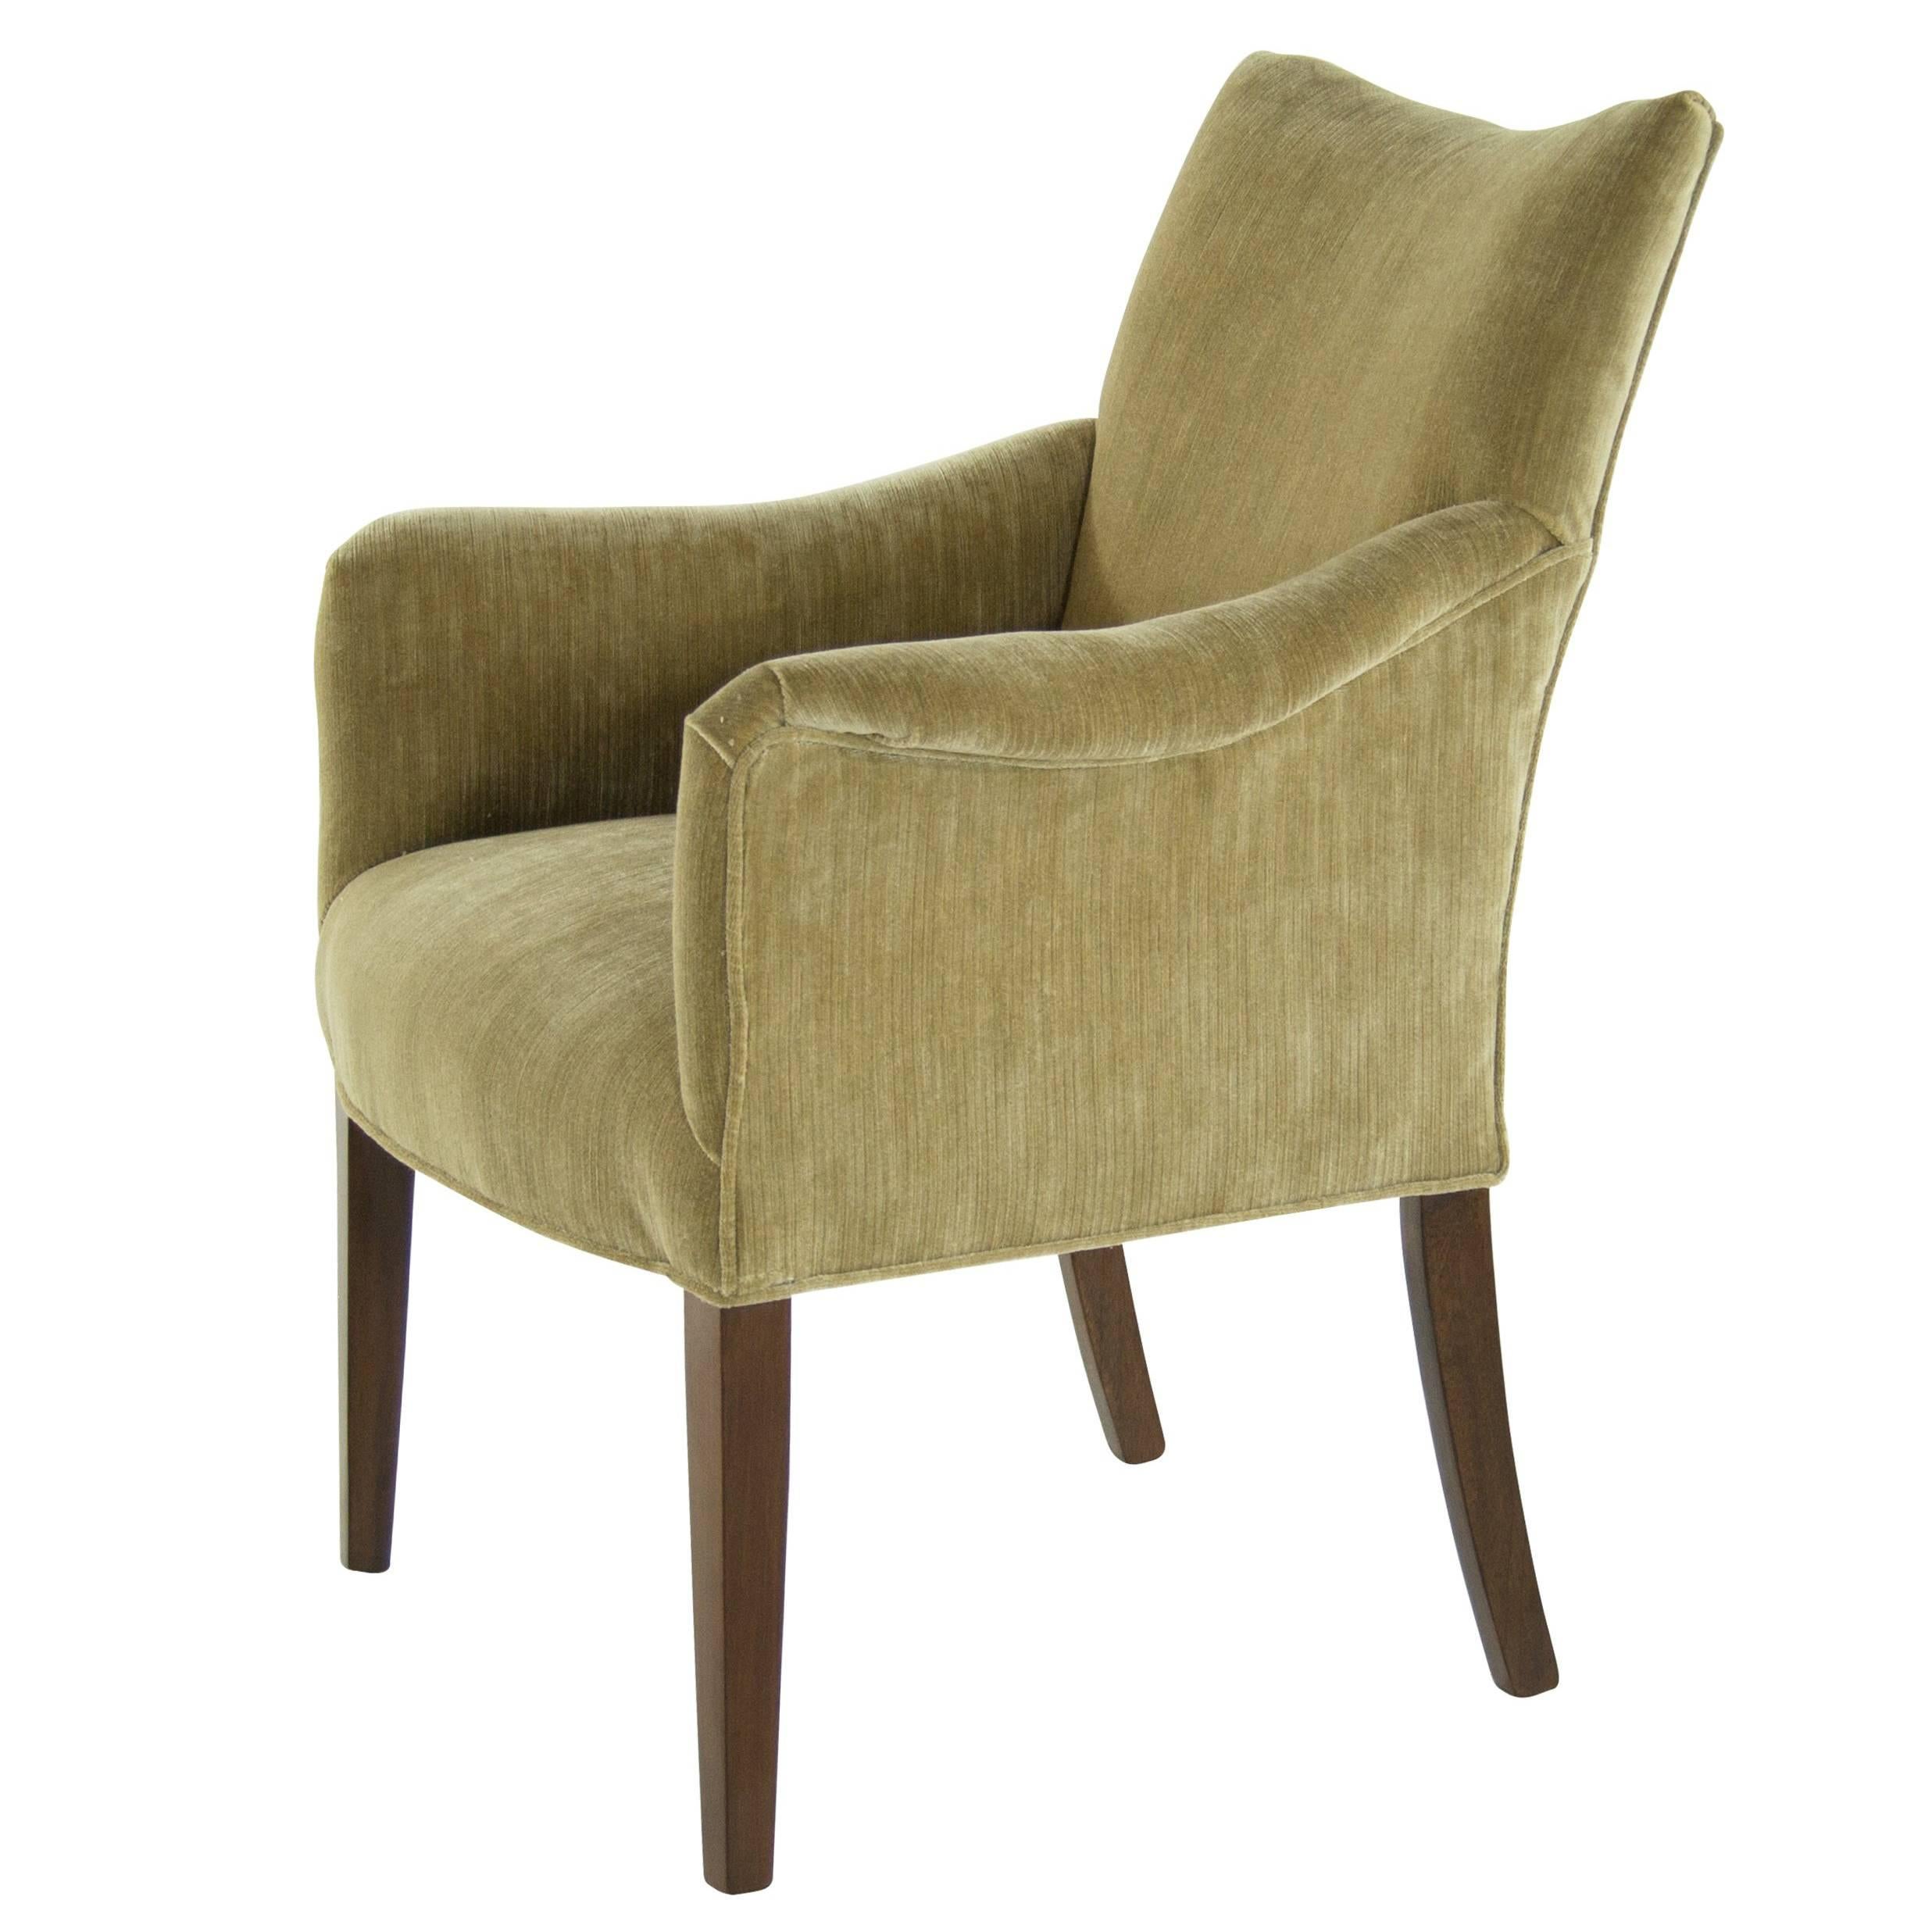 Armchair in the Style of Carl Malmsten, Sweden 1950s